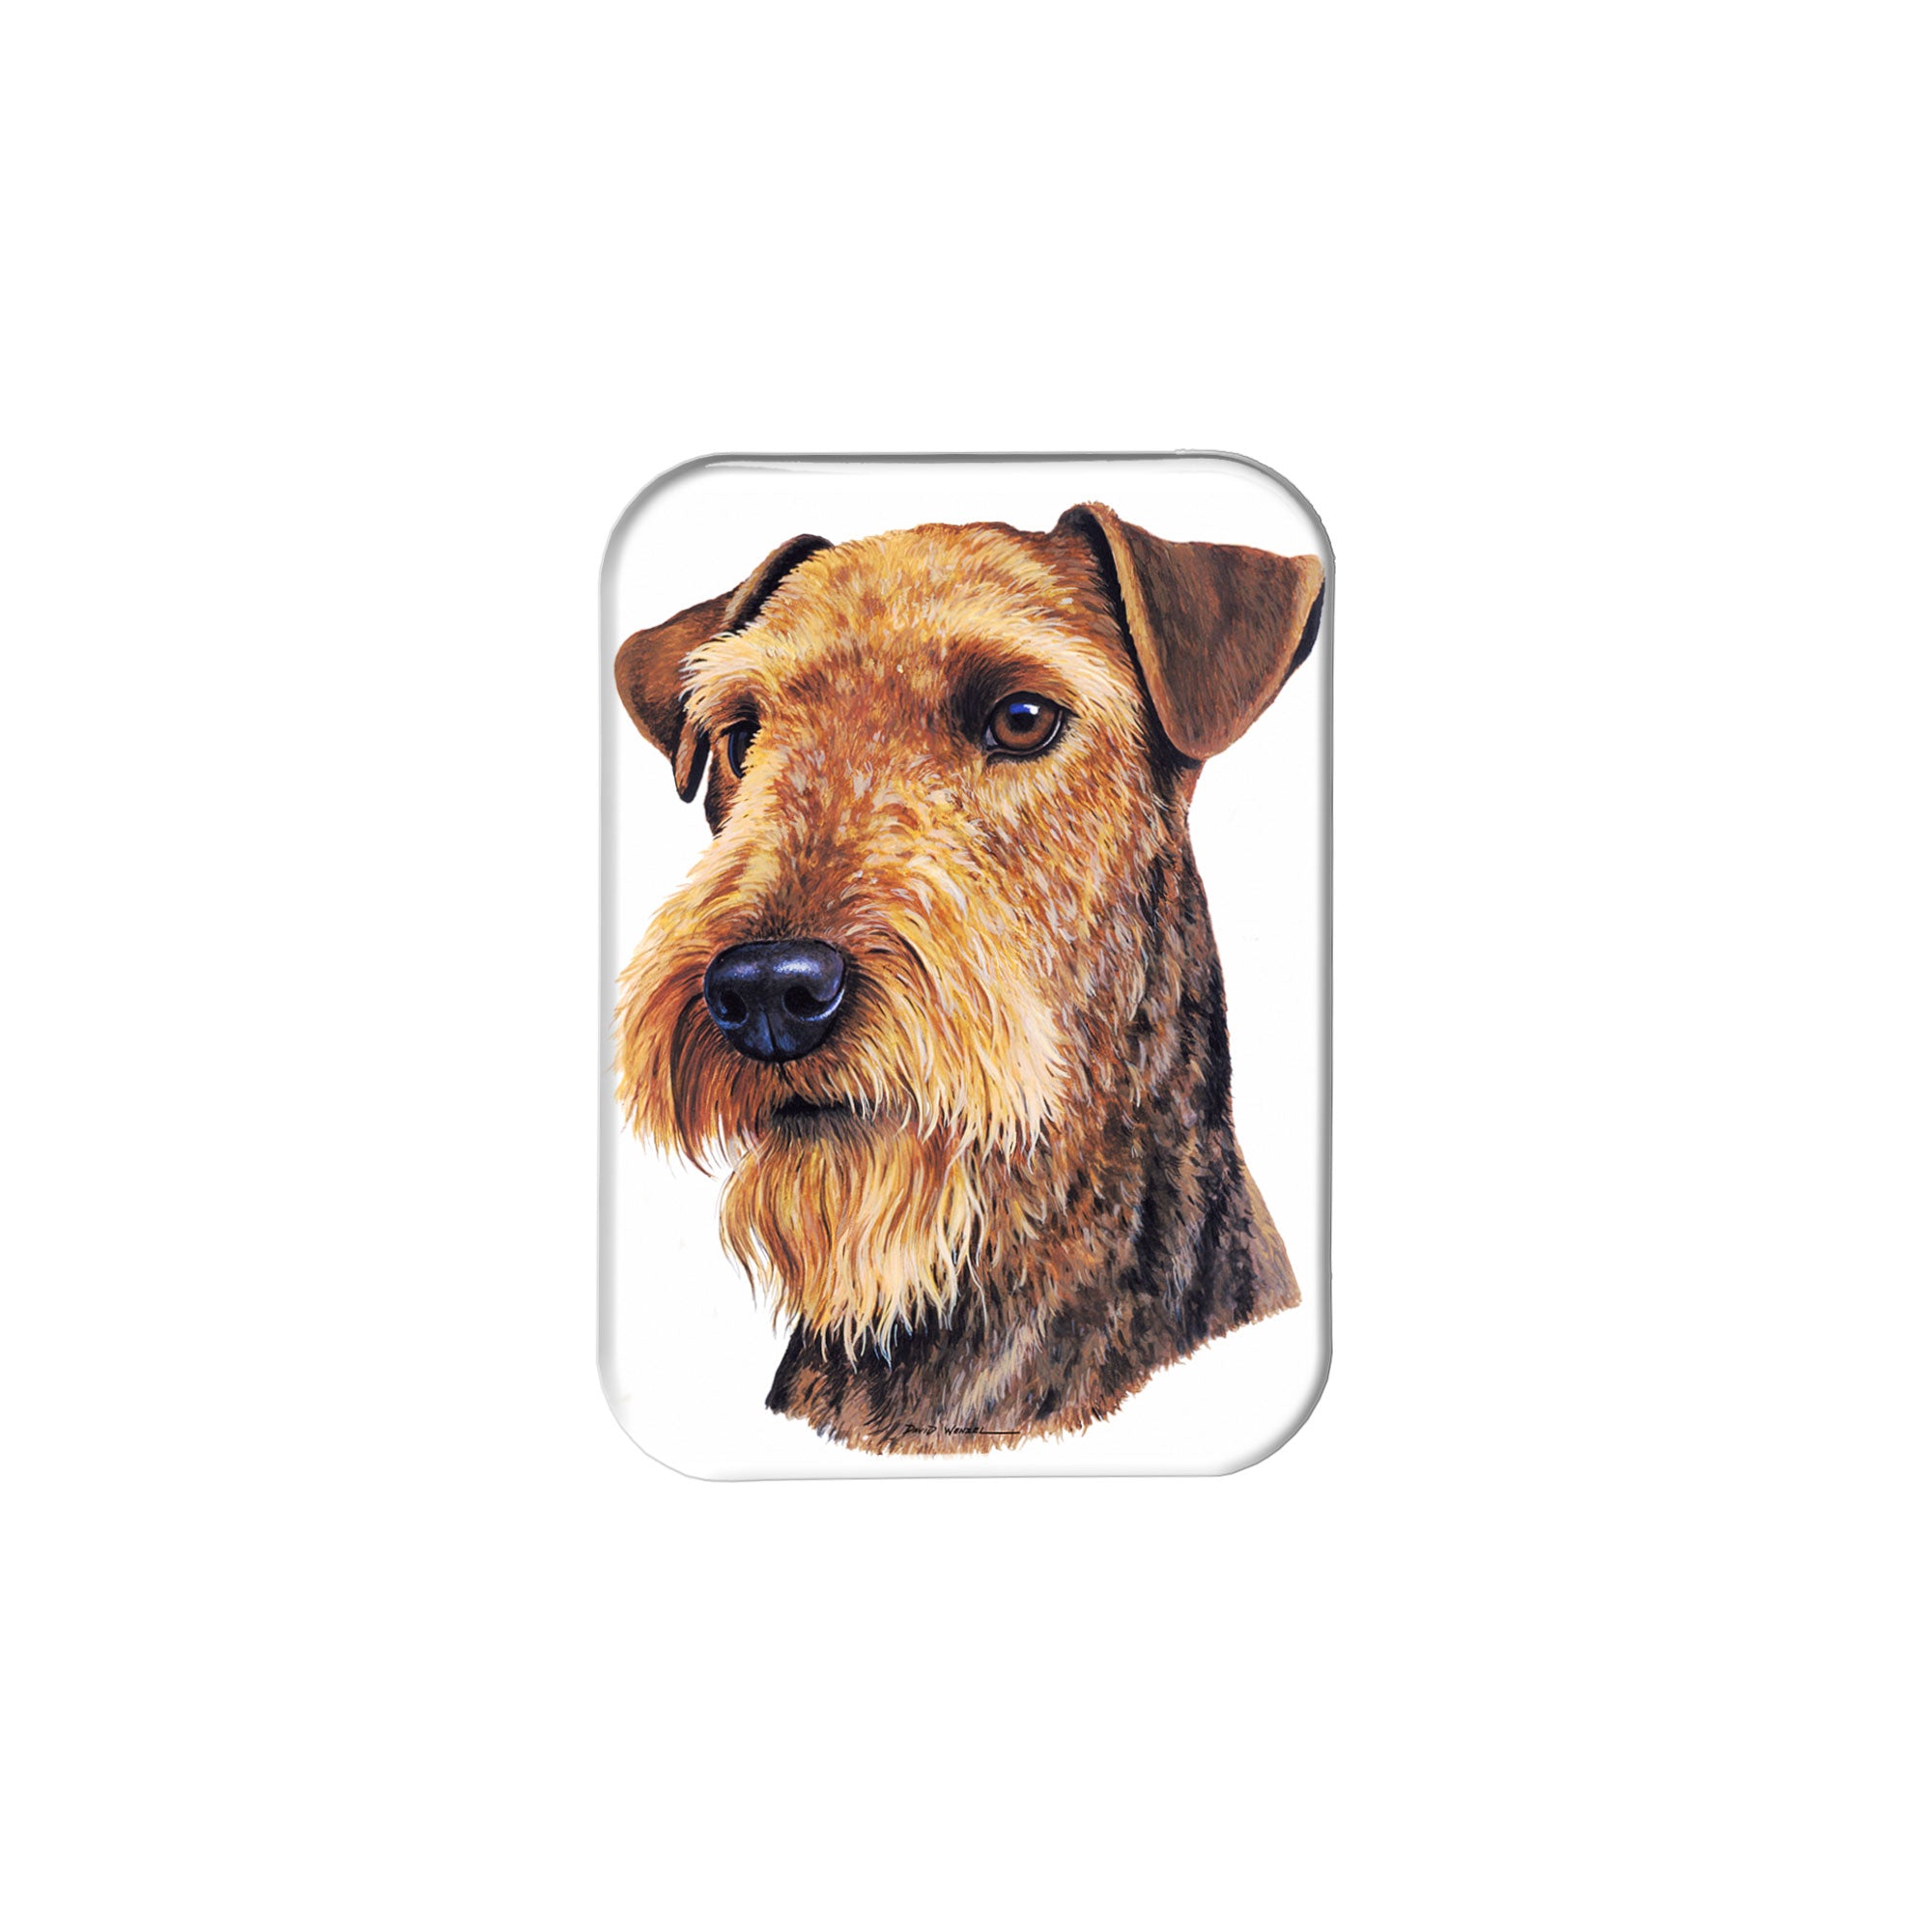 "Airedale Terrier" - 2.5" X 3.5" Rectangle Fridge Magnets